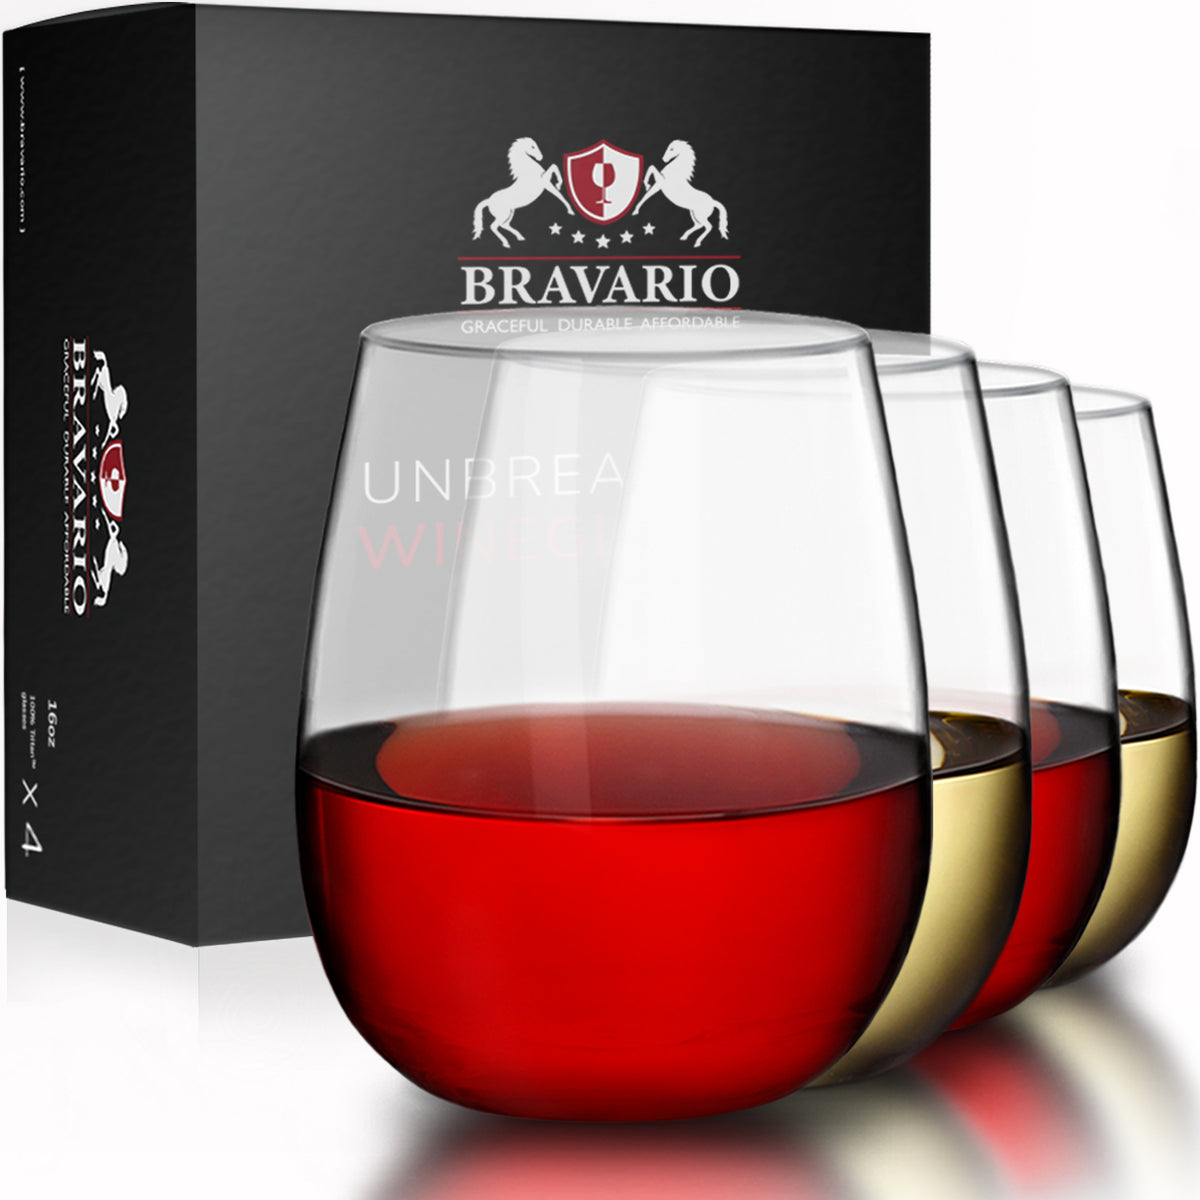 Best Unbreakable Wine Glasses 2023 - Durable And Shatterproof